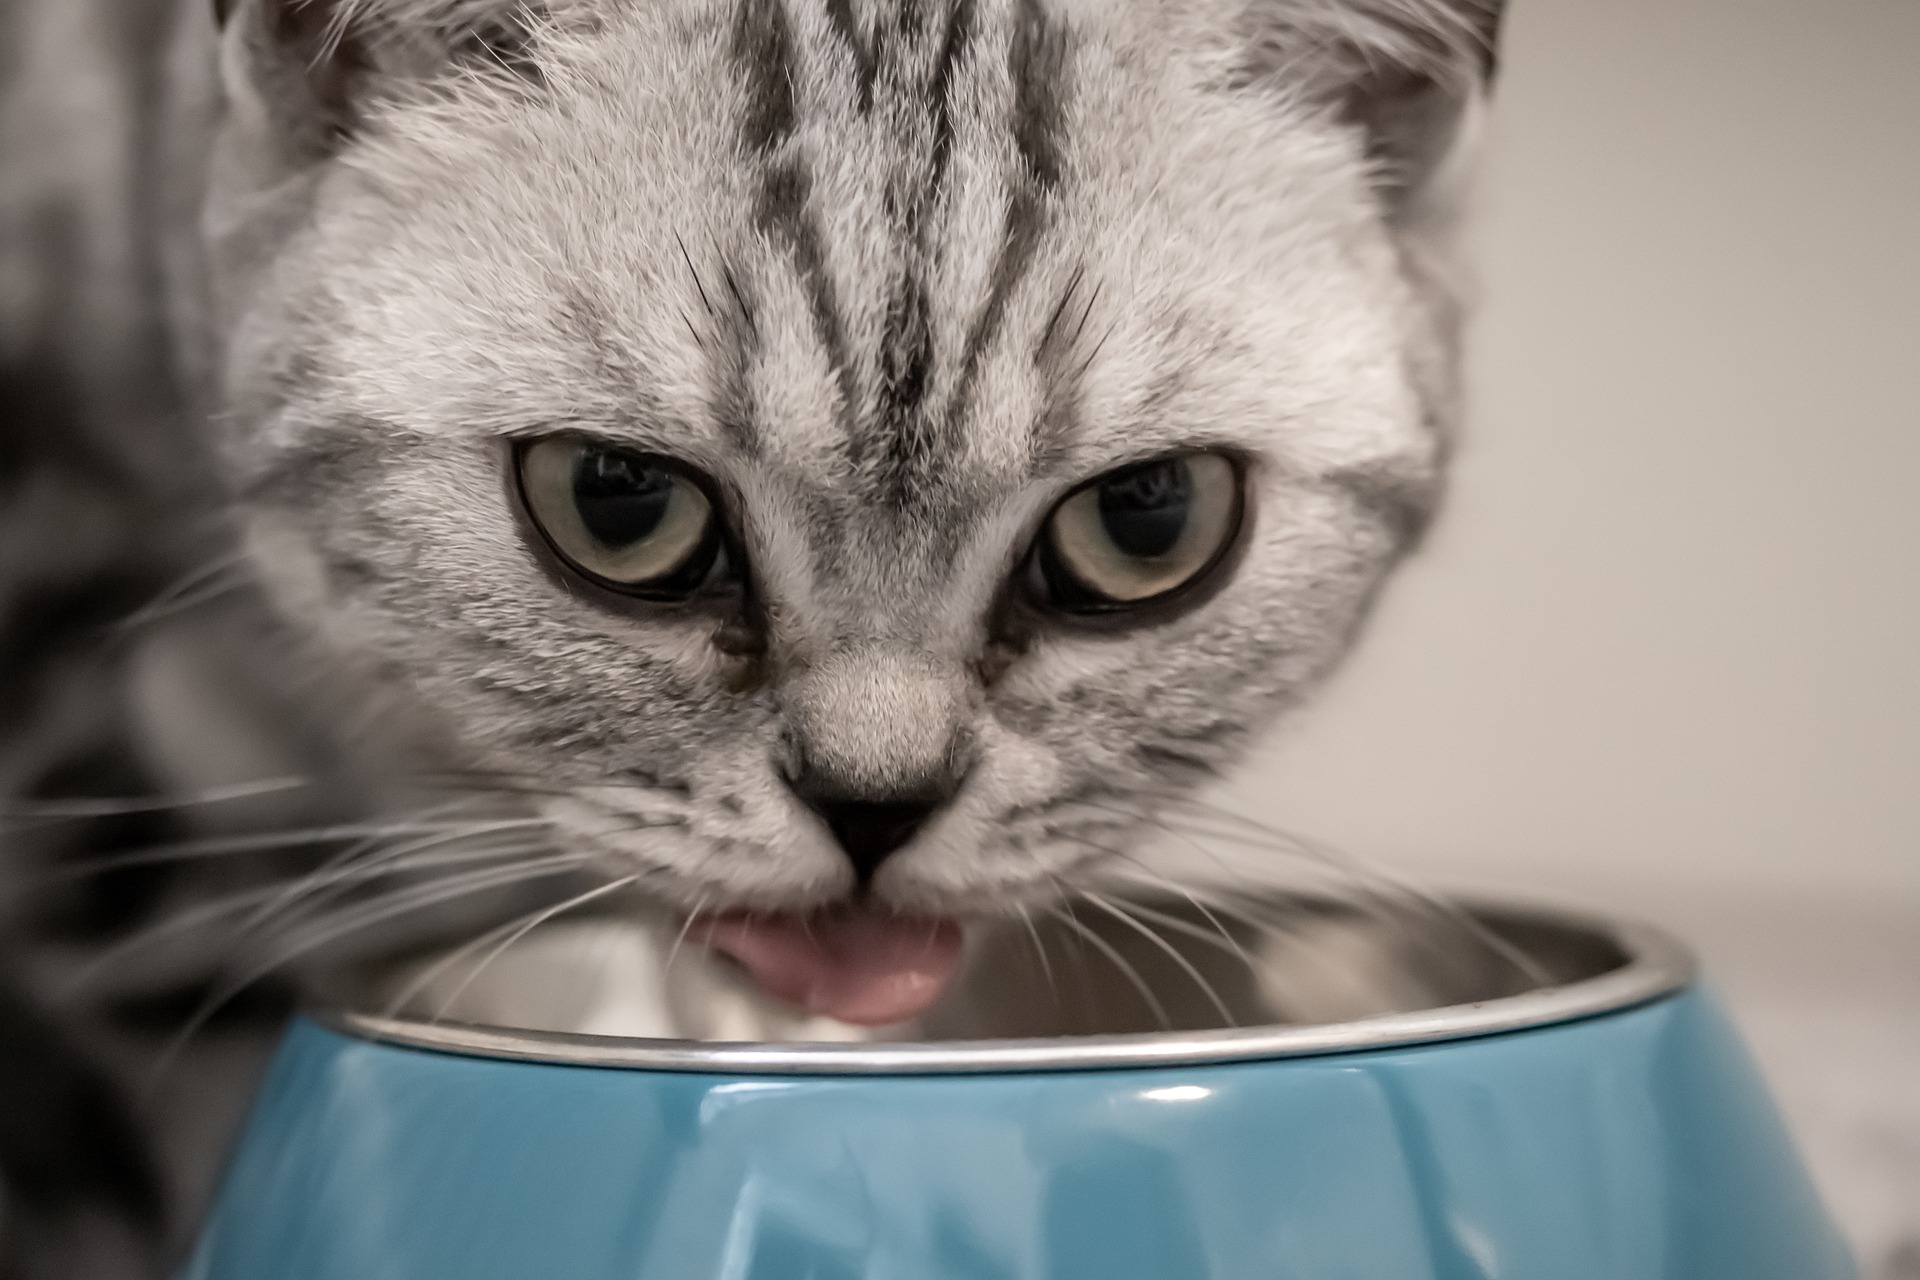 Are cats allowed to eat yogurt? Pictures and Information